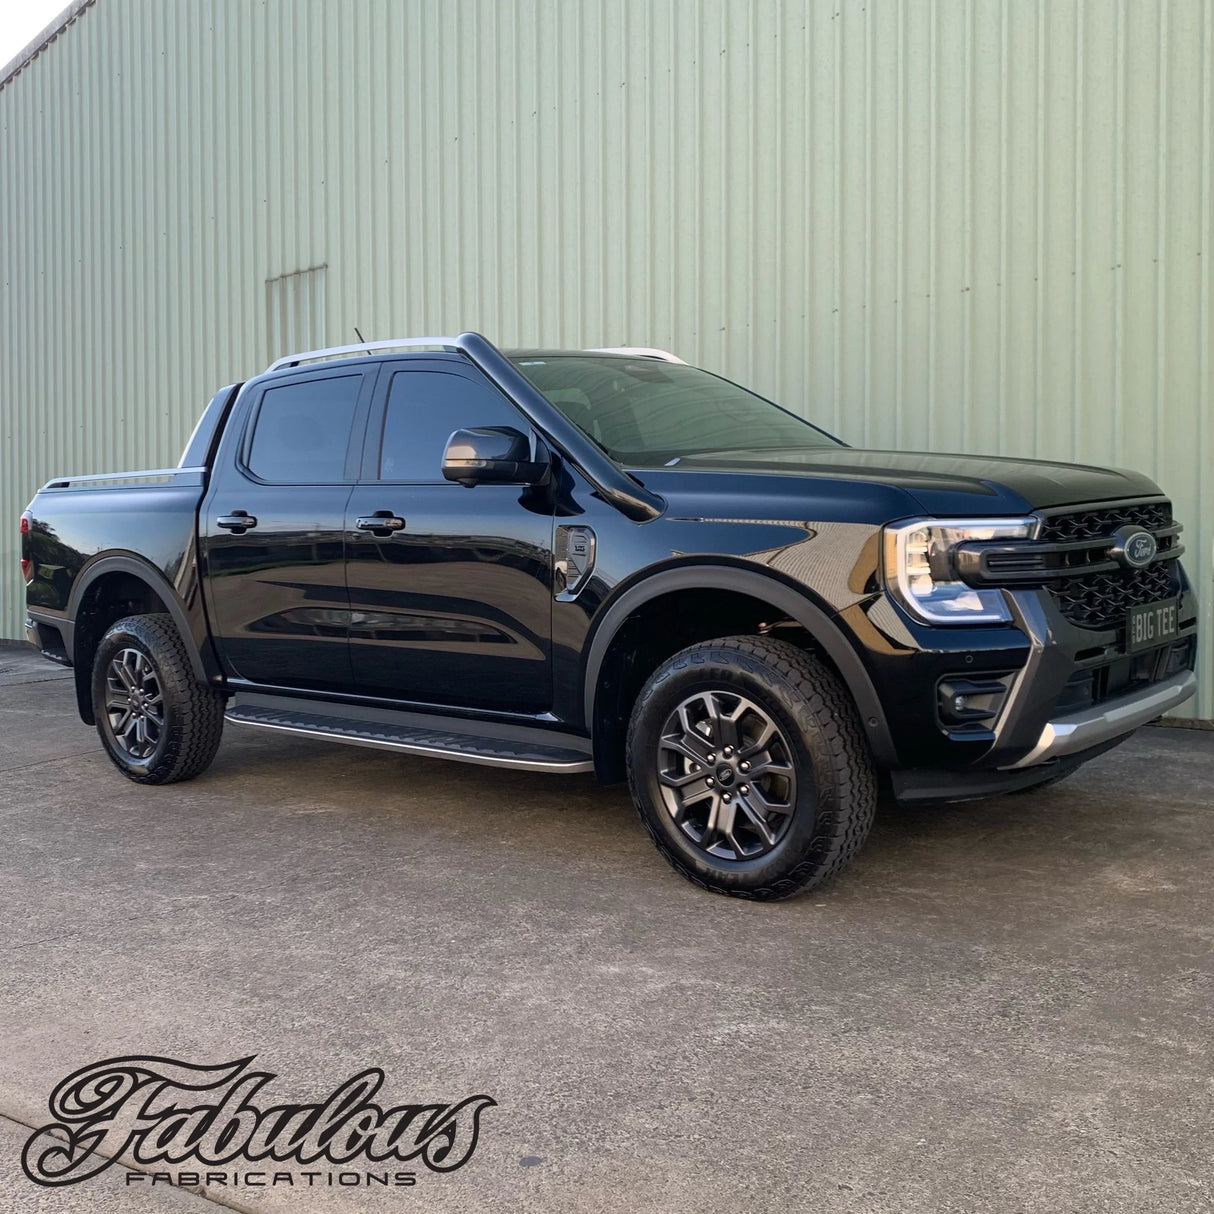 Ford Ranger Next Gen Stainless Snorkel and Alloy Washer Bottle Kit